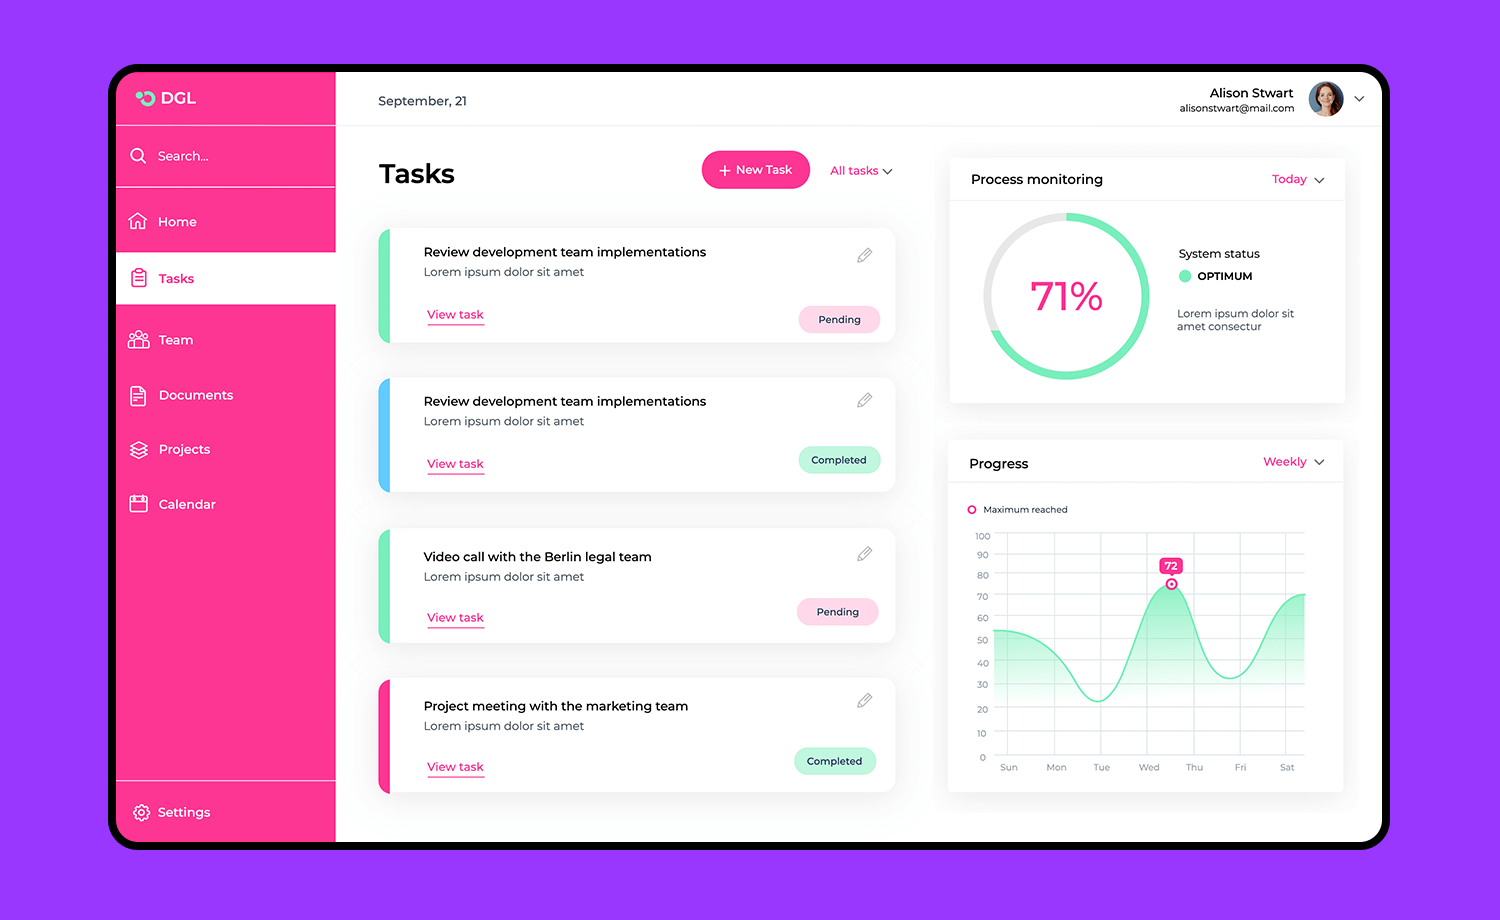 Task management dashboard with vertical navigation and progress tracking